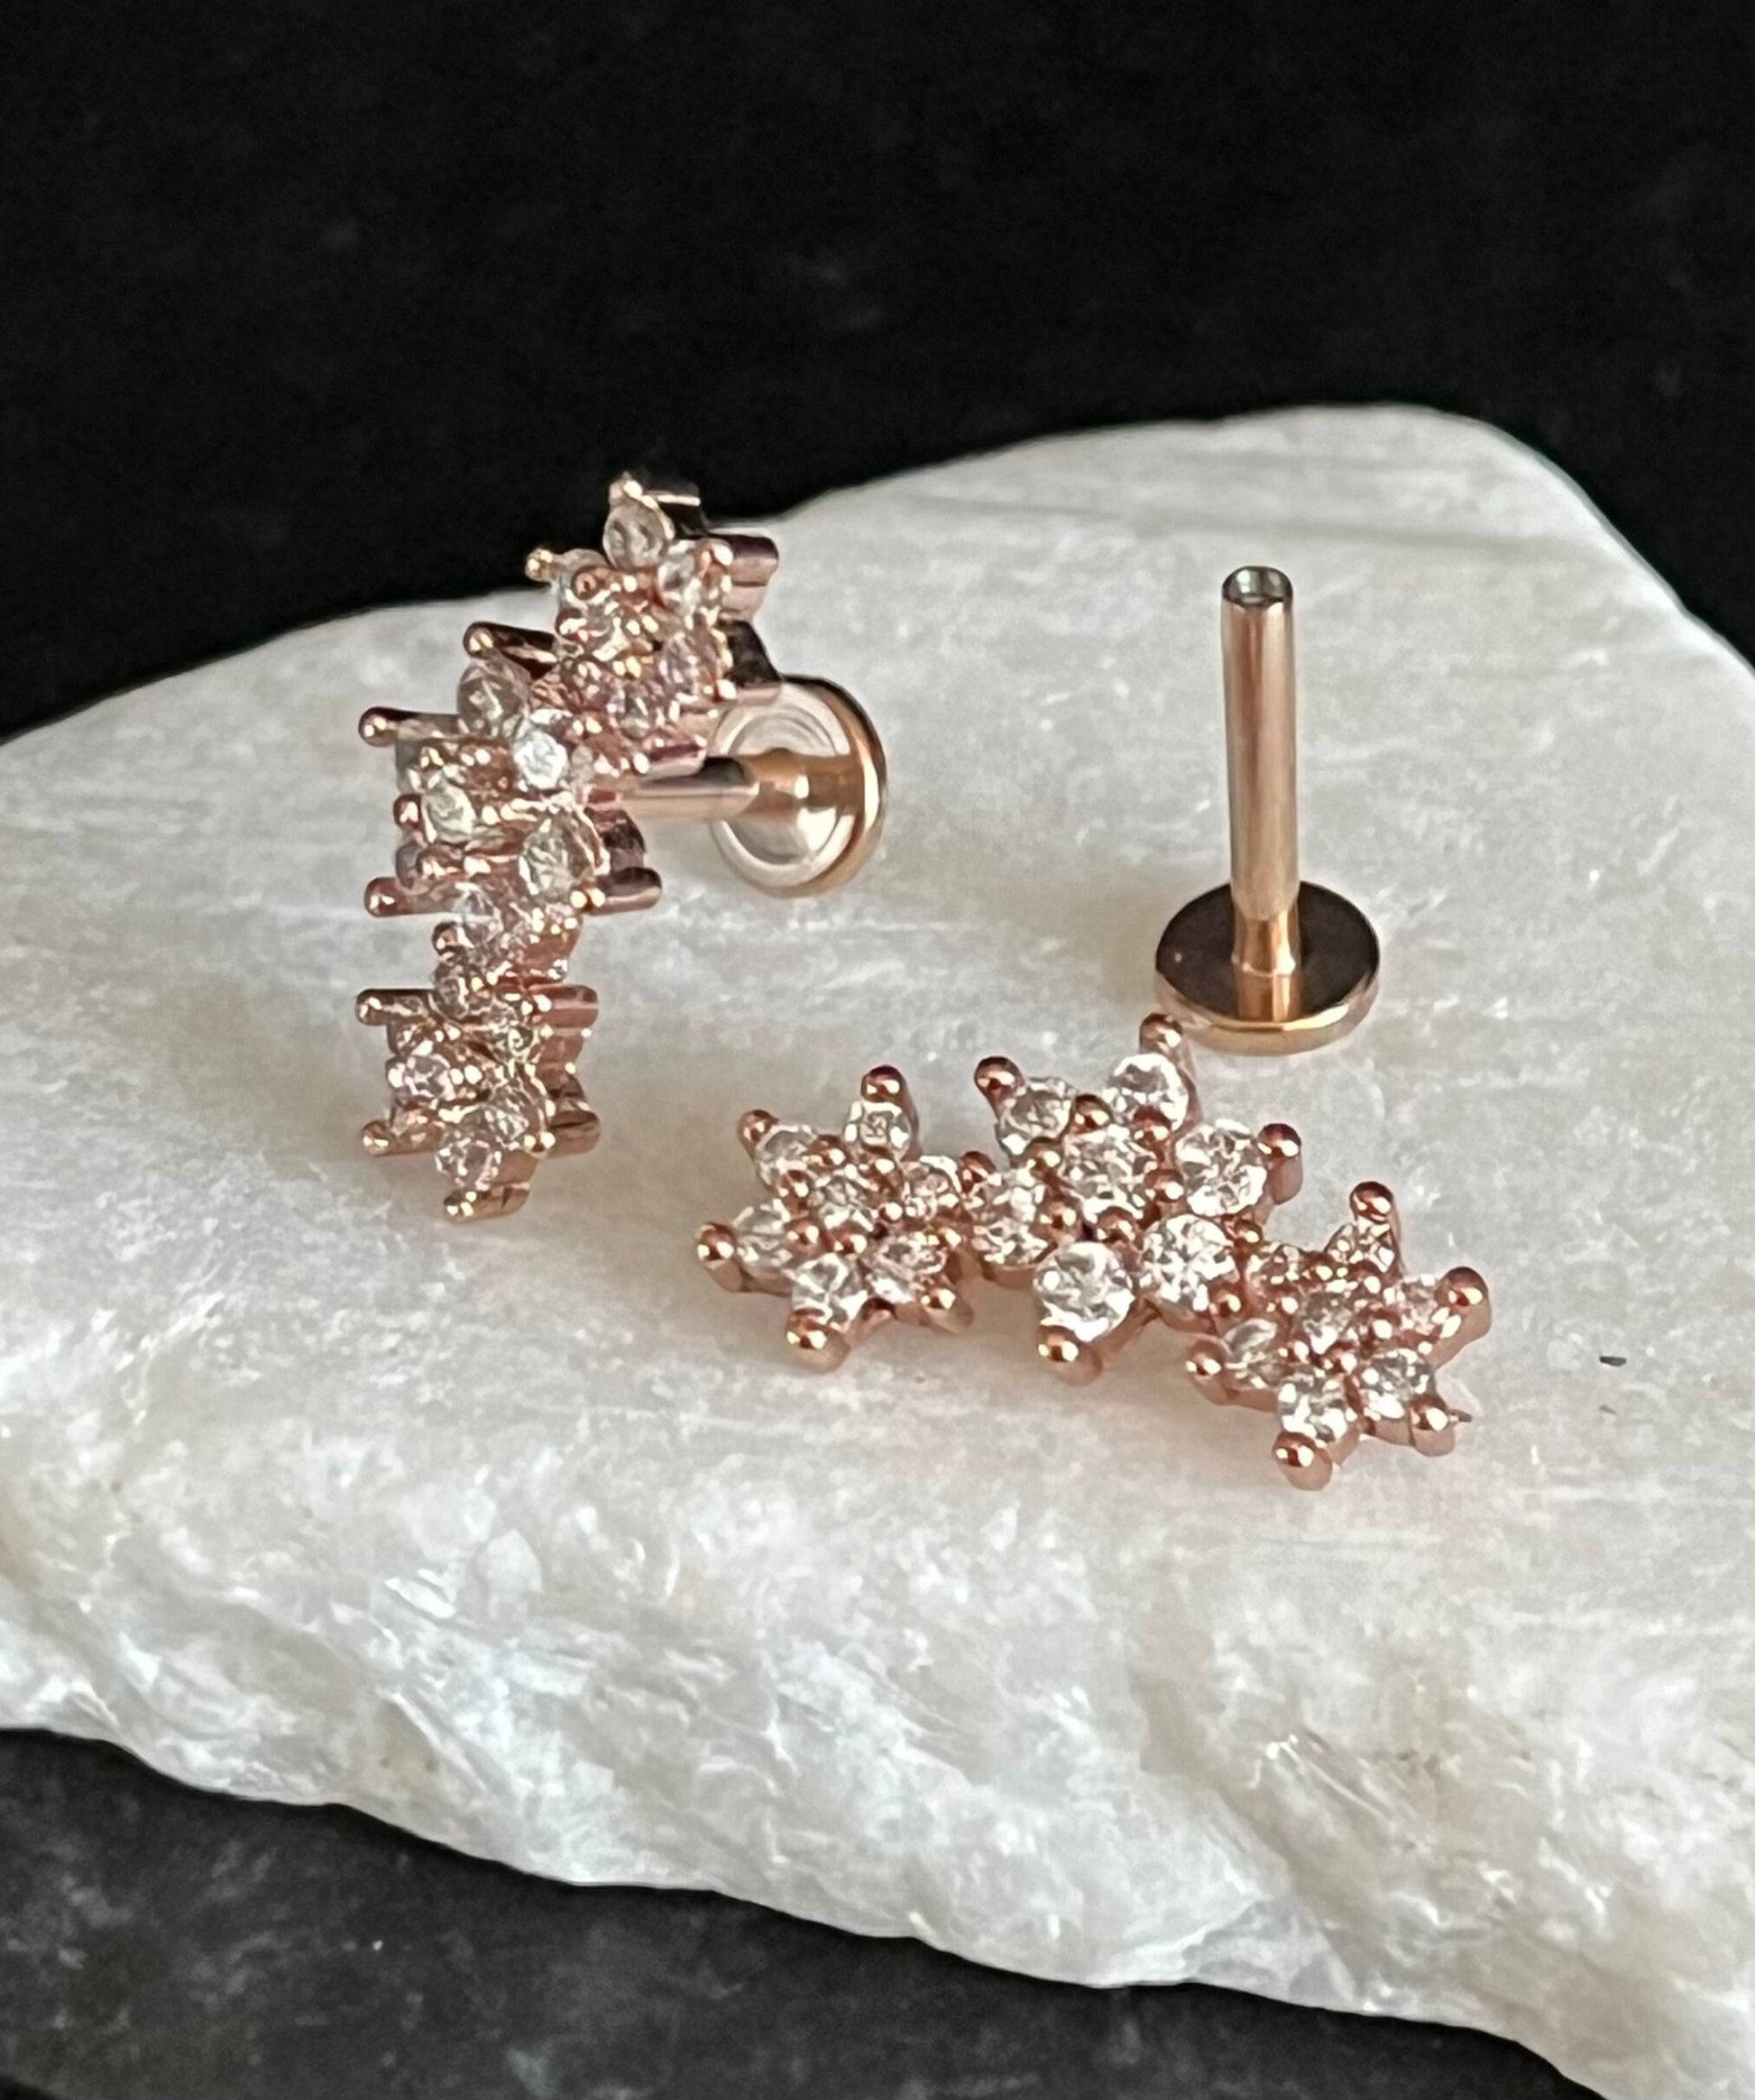 1 Piece Stunning Triple Gem Flowers 16g Internally Threaded Steel Labret - Sliver, Gold, Rose Gold and Aurora Borealis available!